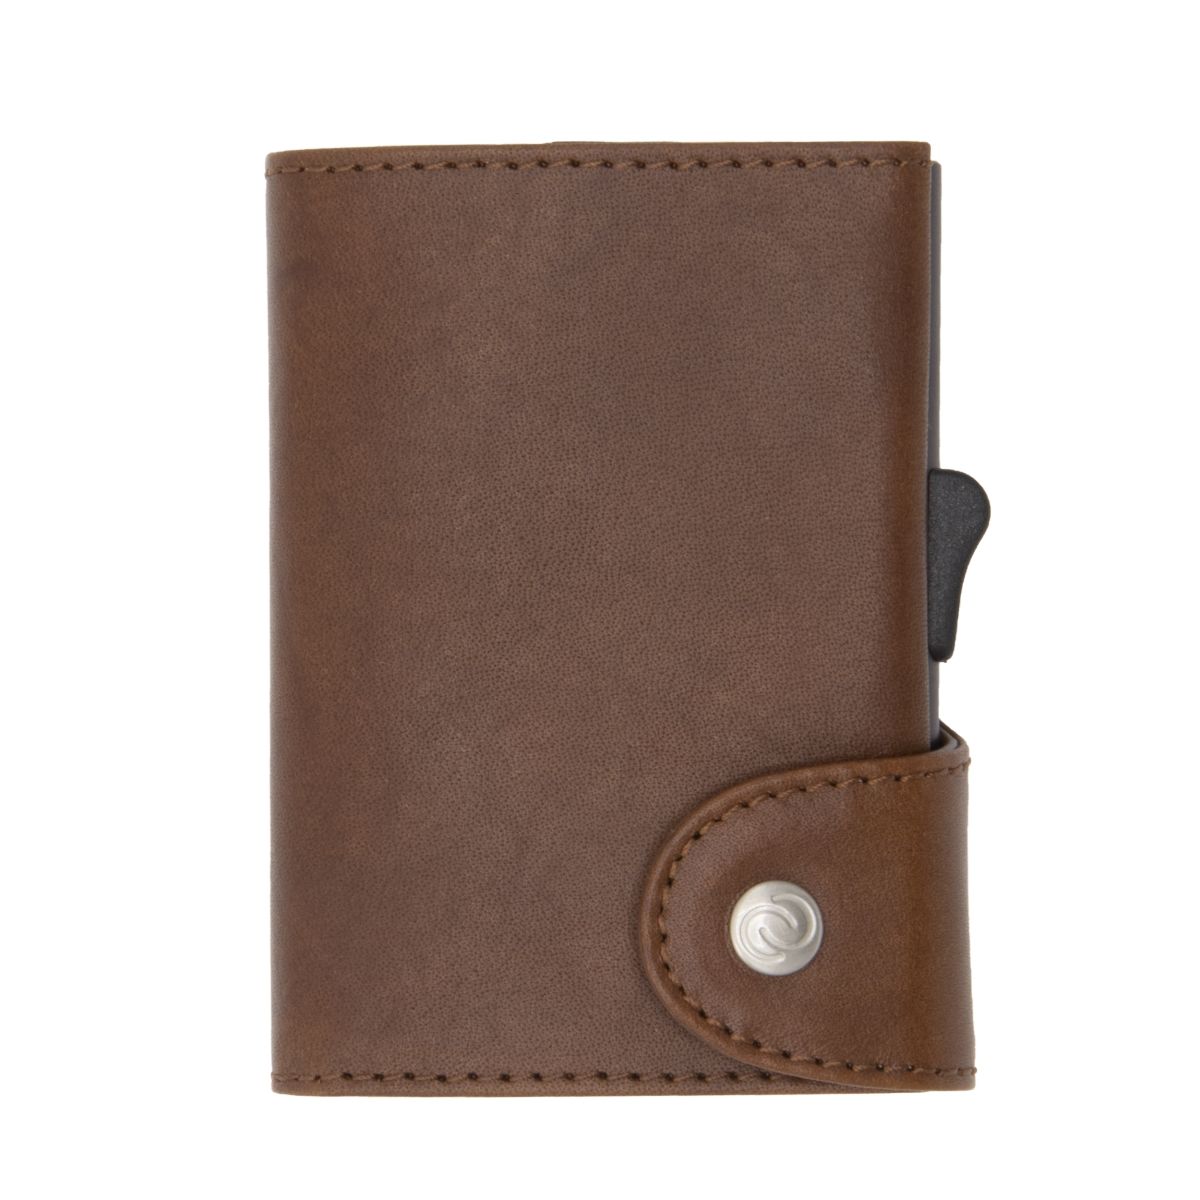 C-Secure XL Aluminum Wallet with Vegetable Genuine Leather - Brown